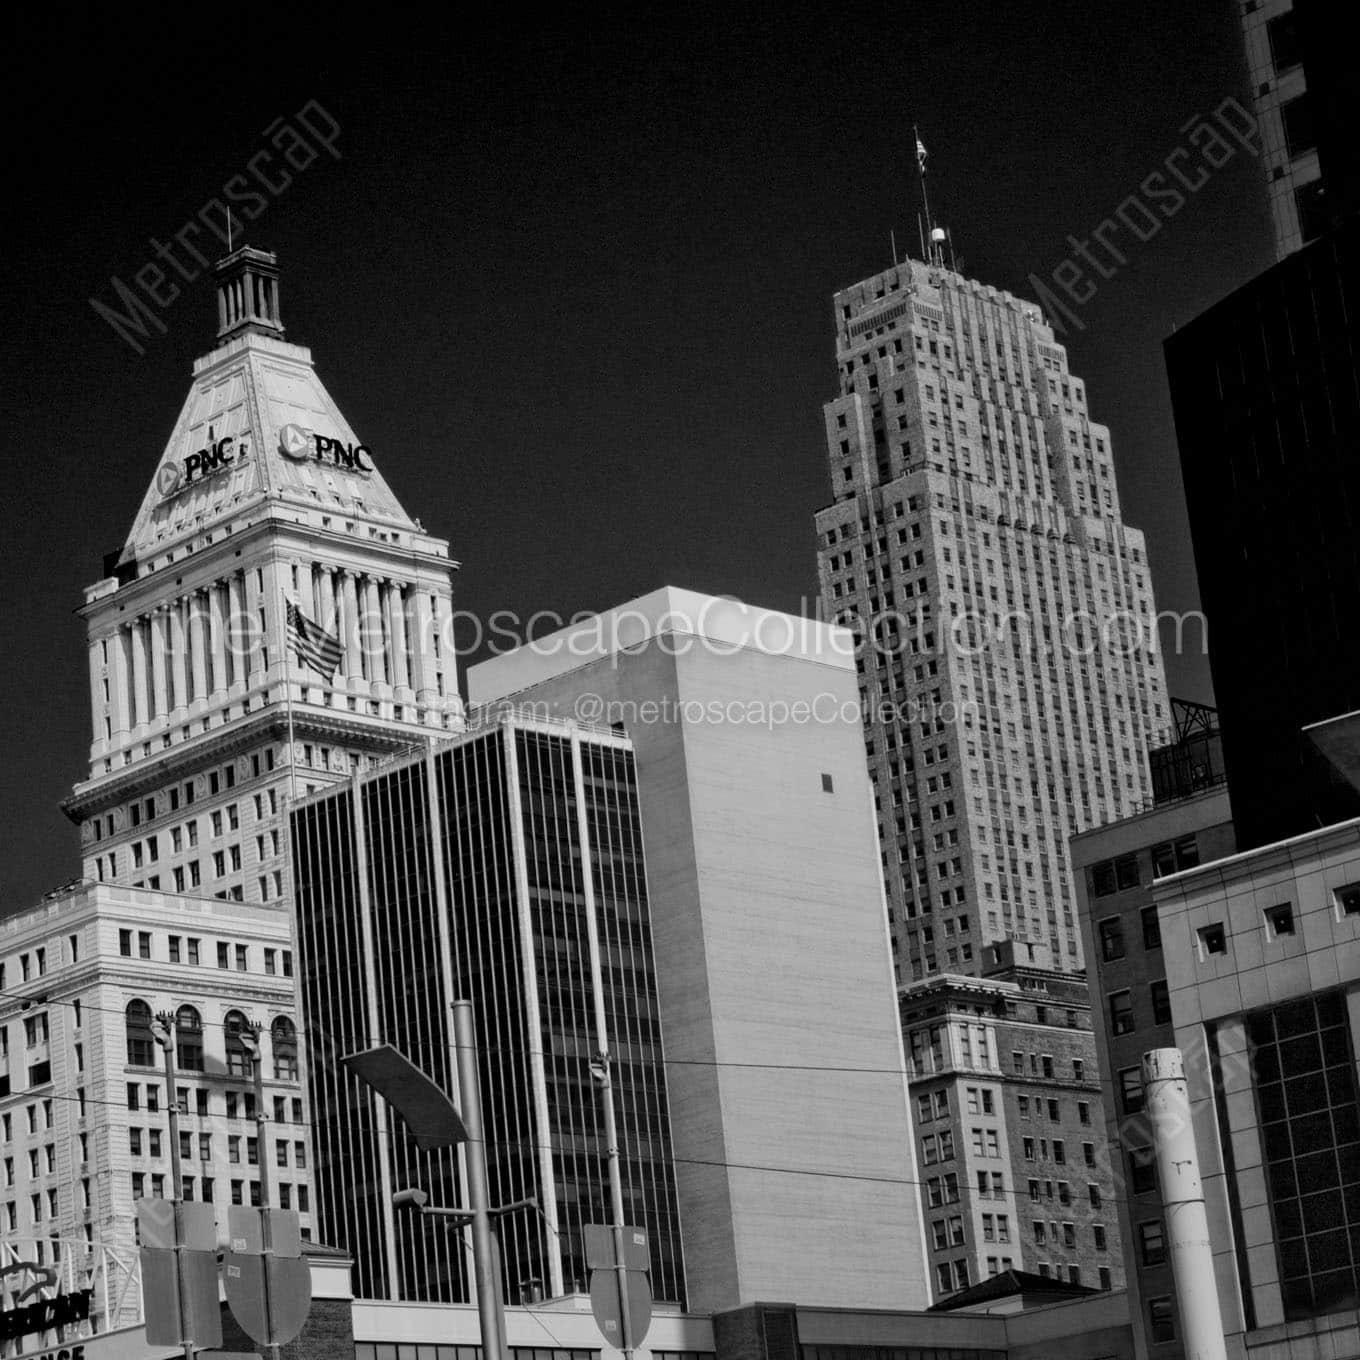 carew tower pnc tower Black & White Wall Art